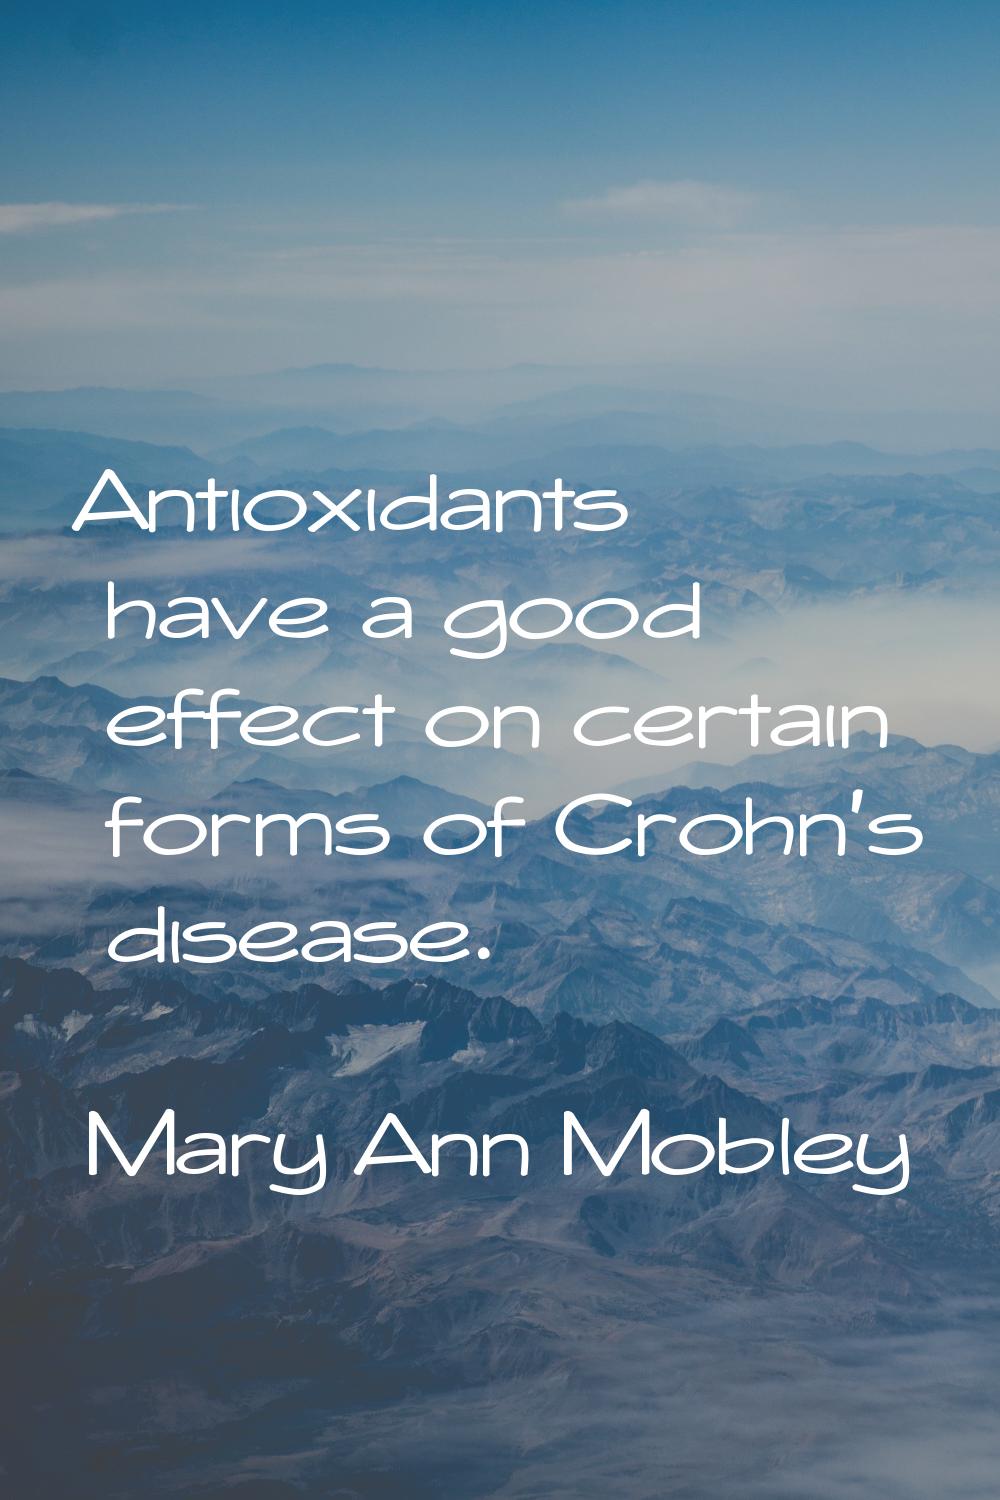 Antioxidants have a good effect on certain forms of Crohn's disease.